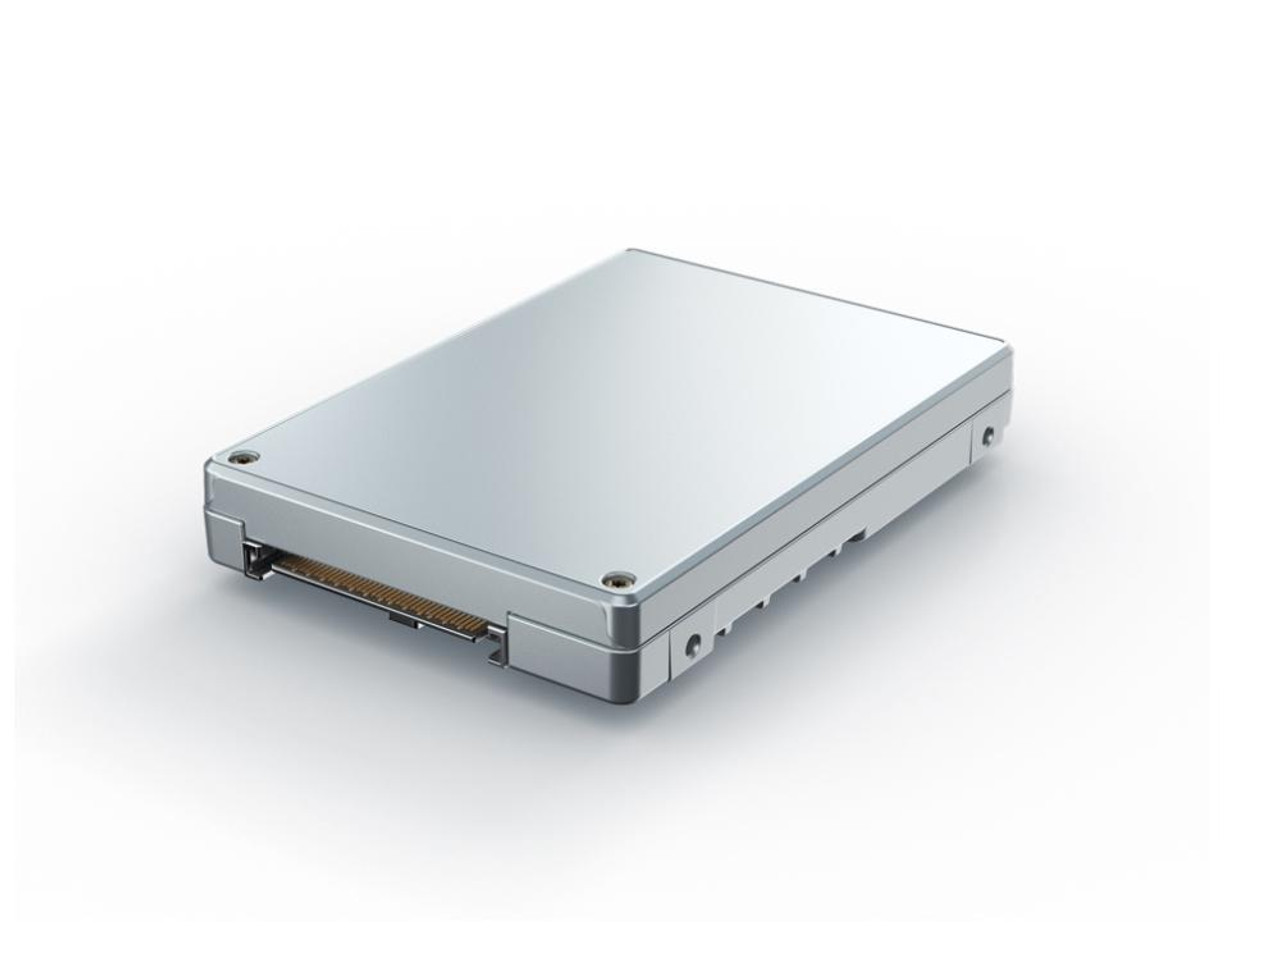 SOLIDIGM D7-P5520 3.84 TB Solid State Drive